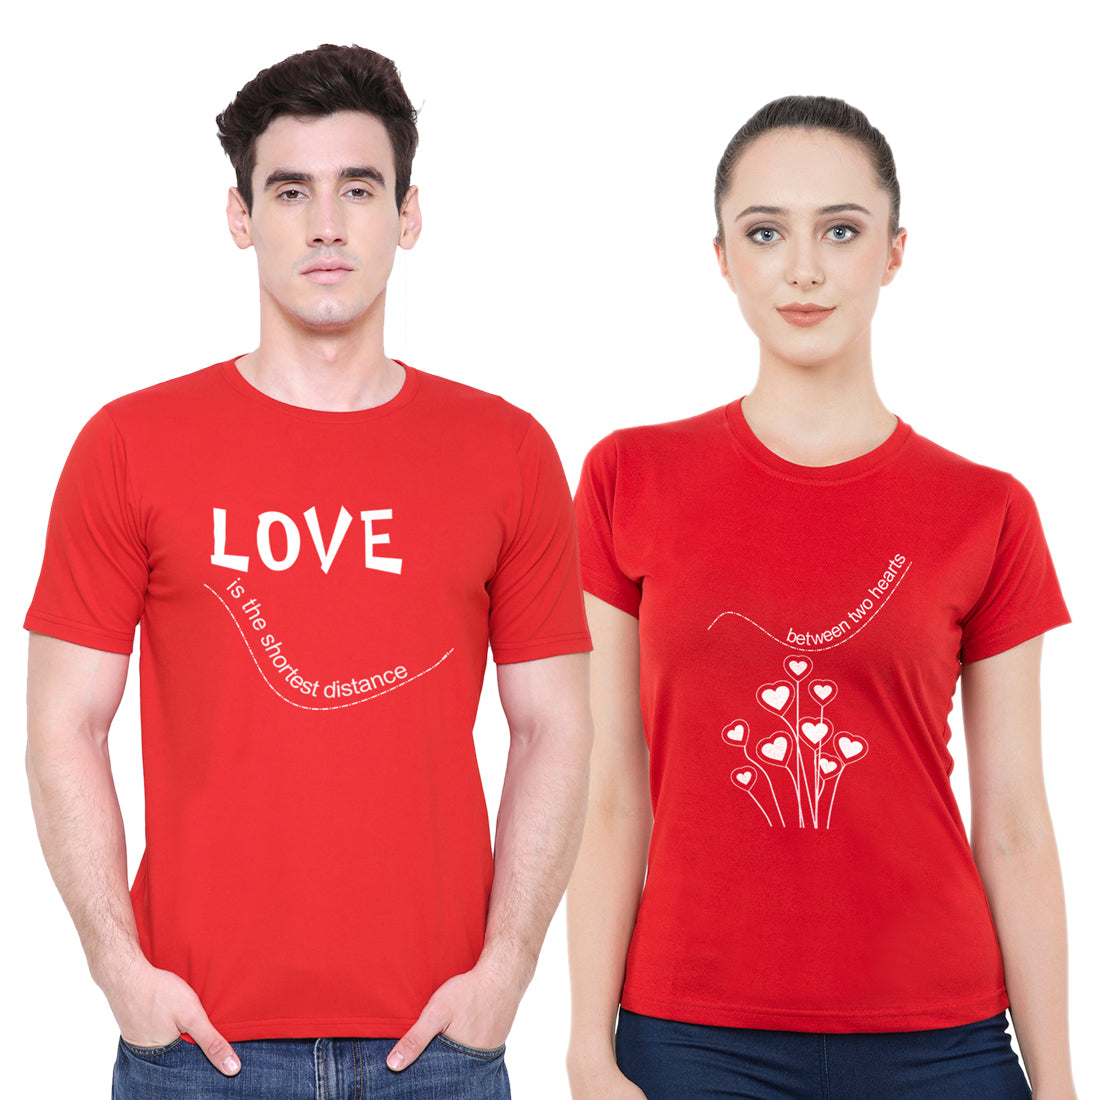 Love distance matching Couple T shirts- Red